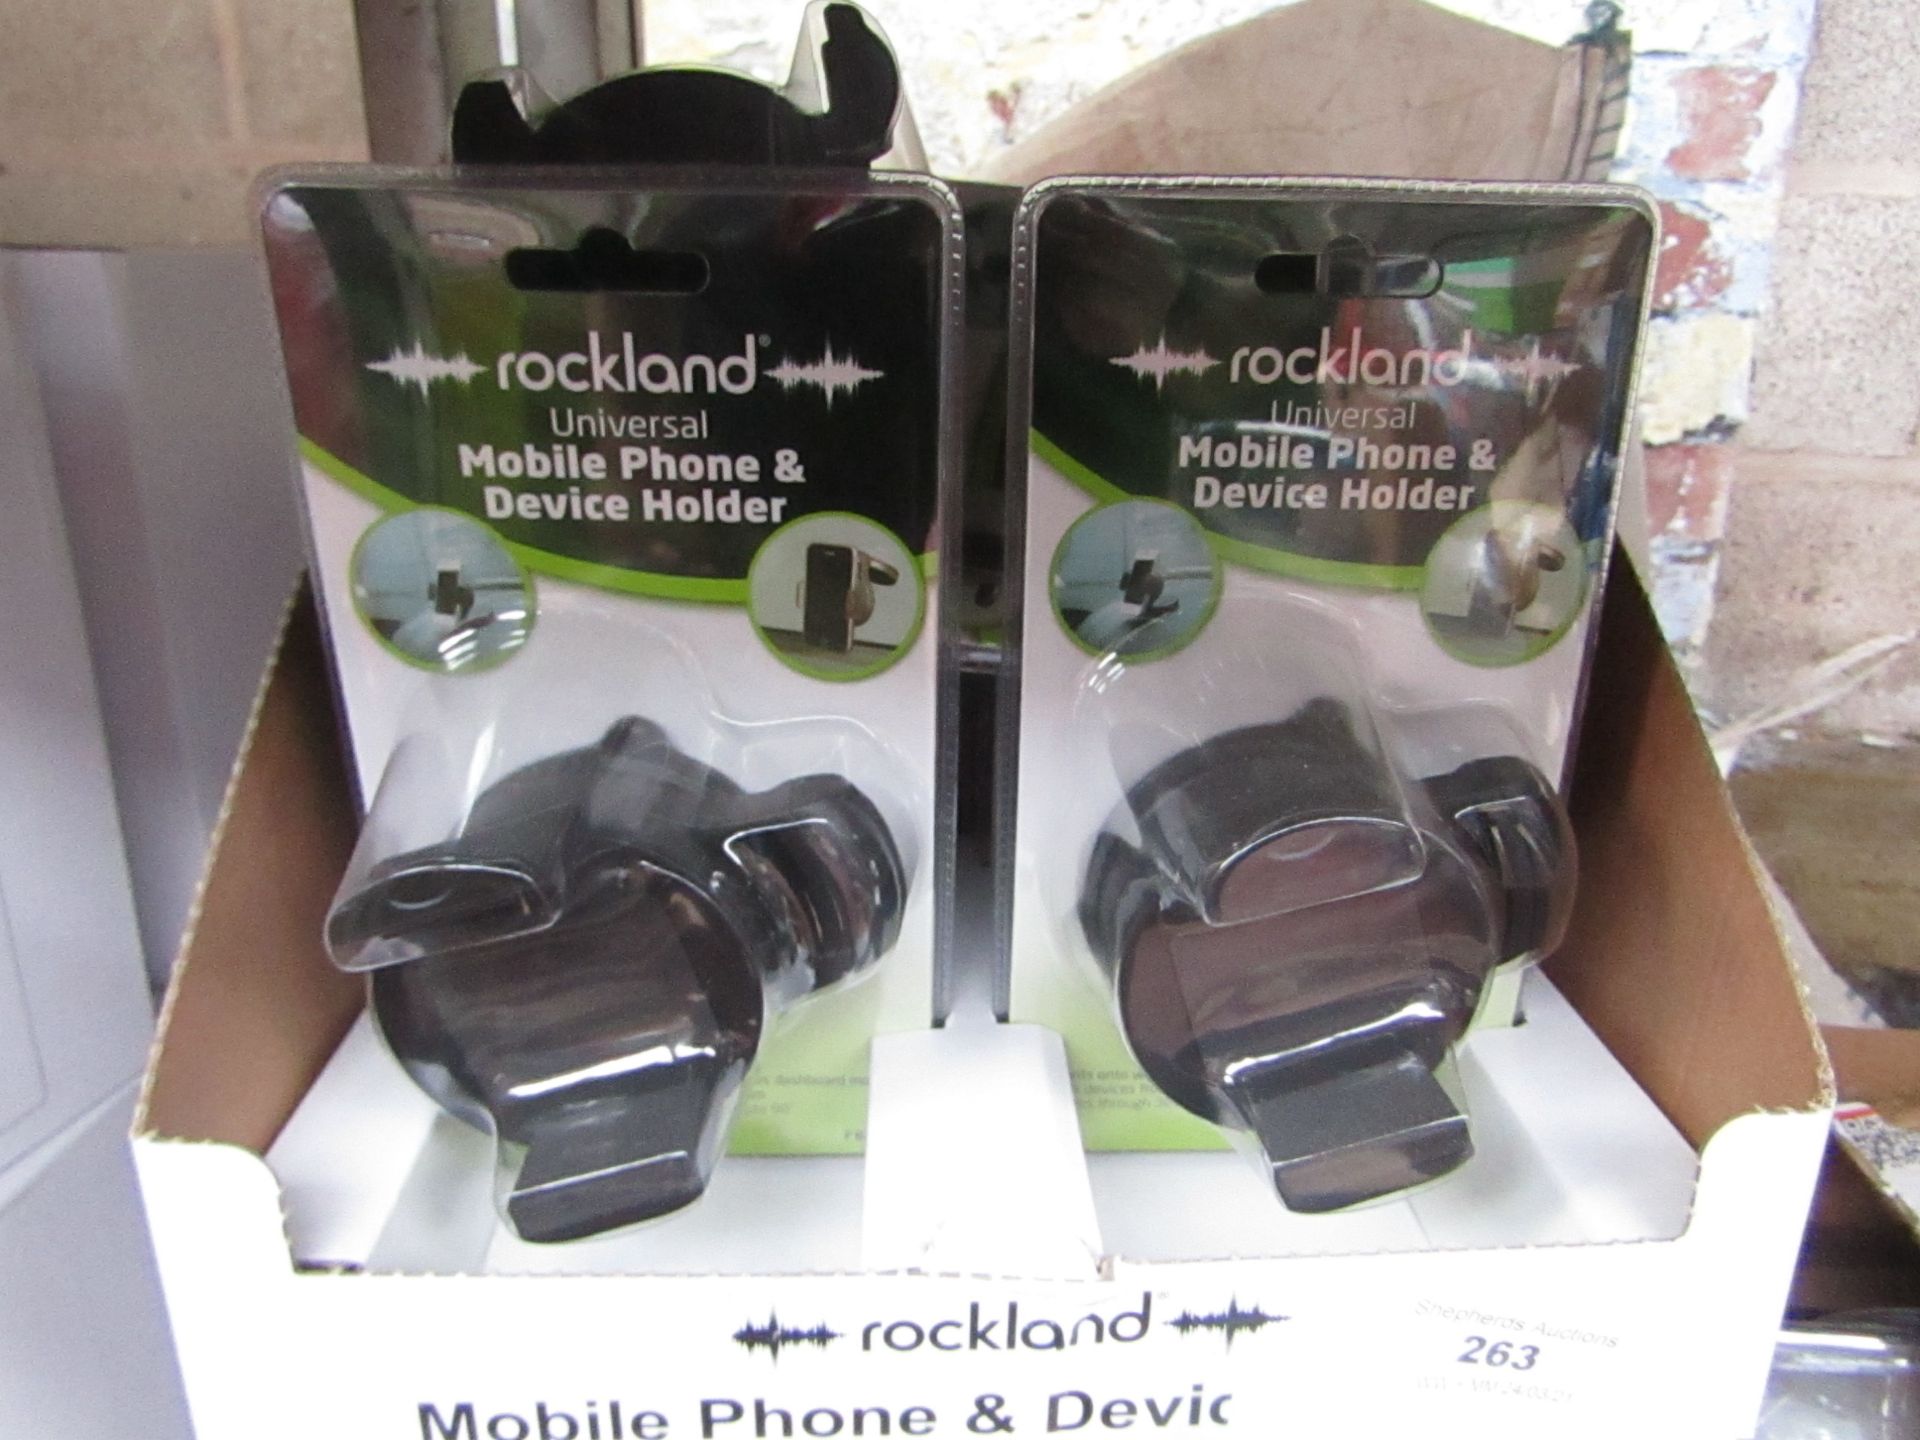 A Box of 4x Rockland Universal Mobile phone and device holders - New.